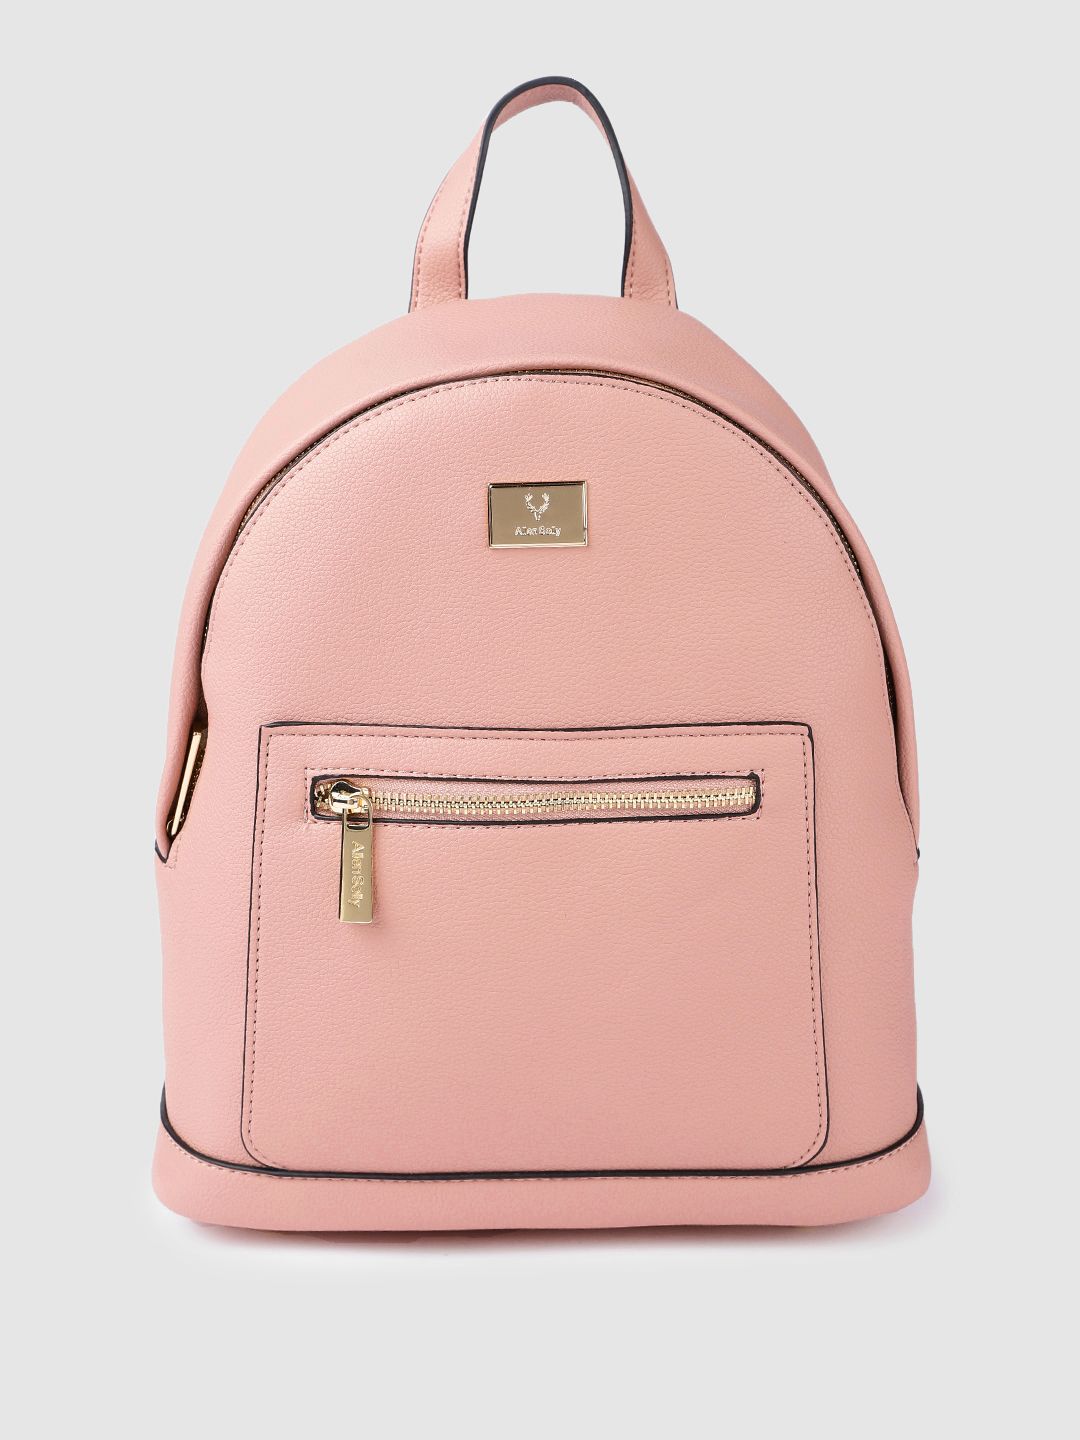 Allen Solly Women Pink Solid Backpack Price in India